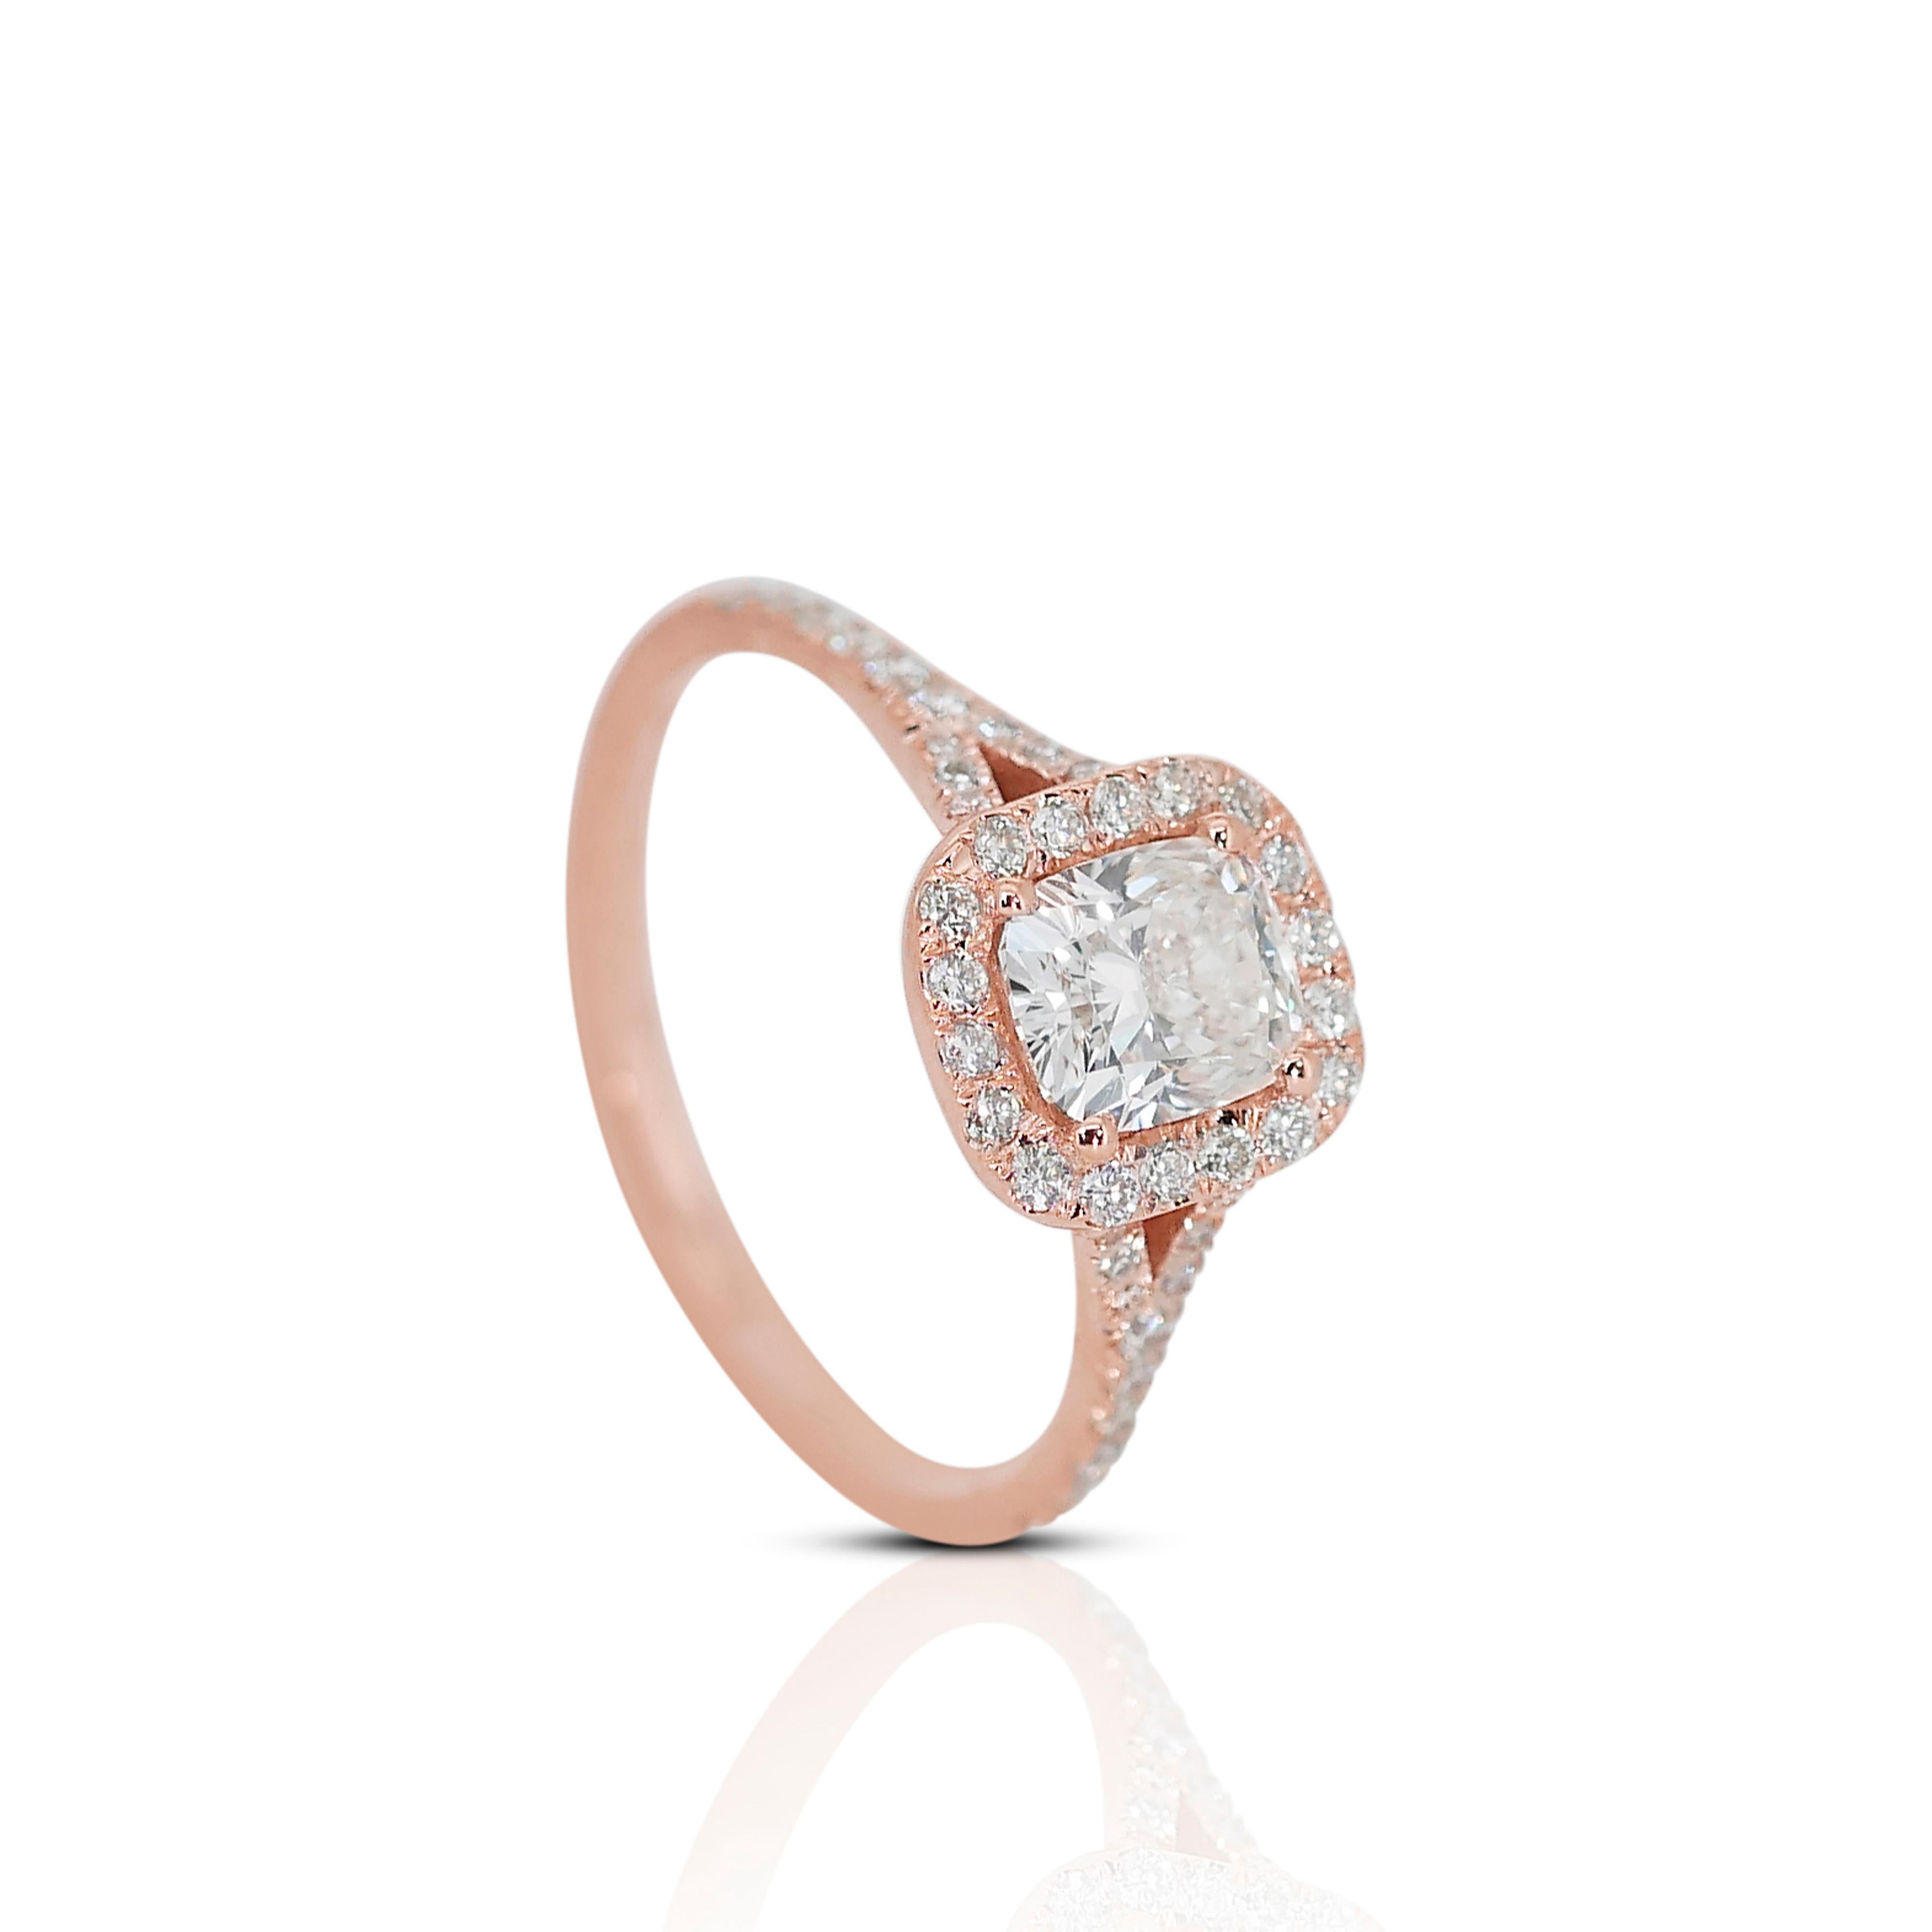 Mesmerizing 18K Rose Gold Ideal Cut Pave Natural Diamond Ring w/1.27ct

This mesmerizing piece features a central 1.01 carat cushion modified brilliant diamond. Accompanying this exquisite centerpiece are 24 round brilliant cut diamond side stones,